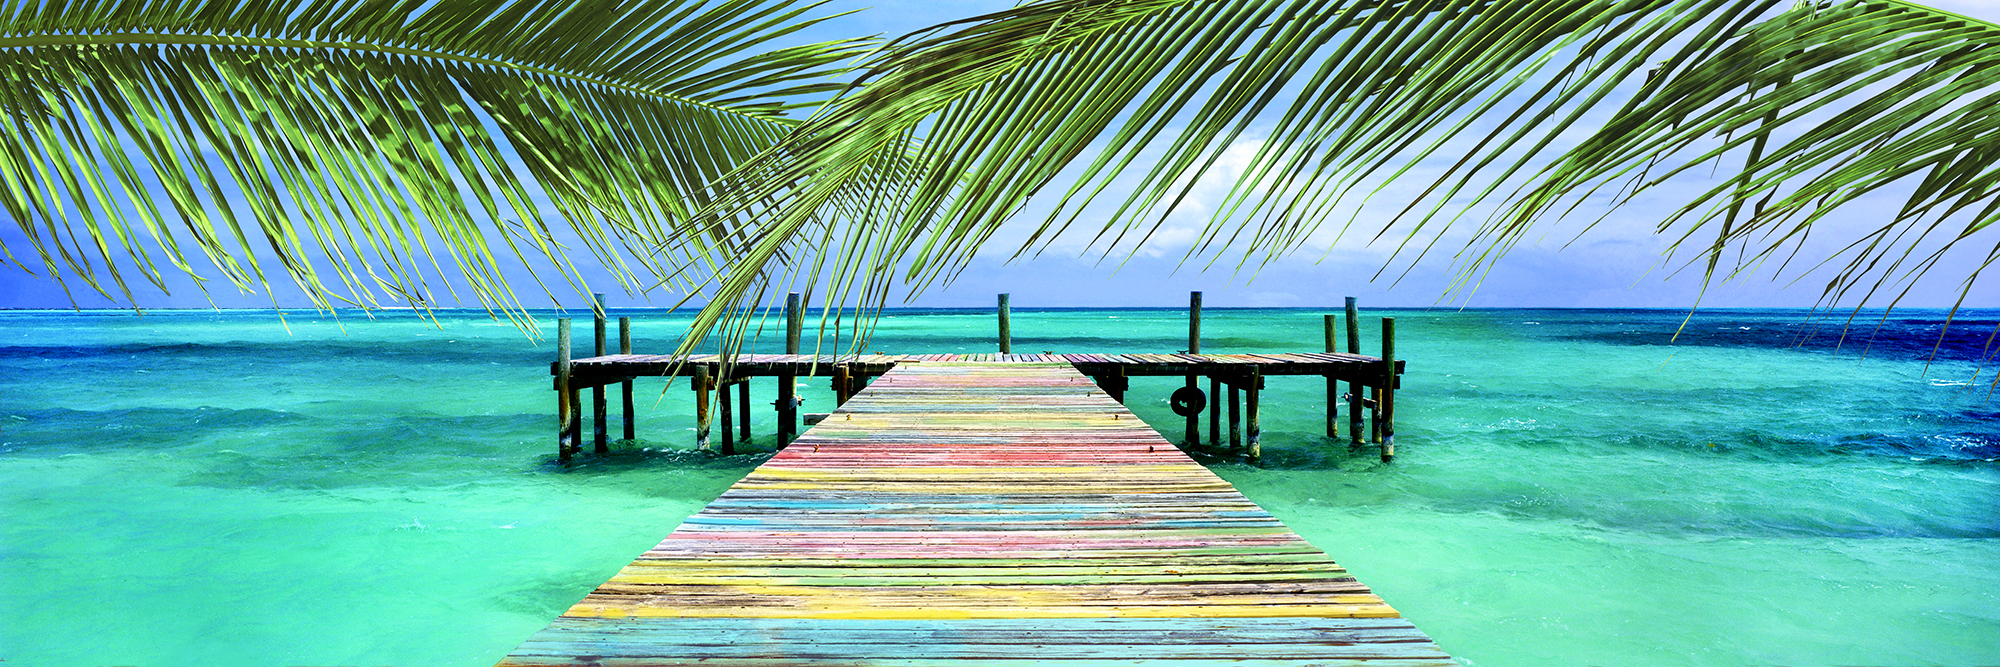 Dock colorfully painted